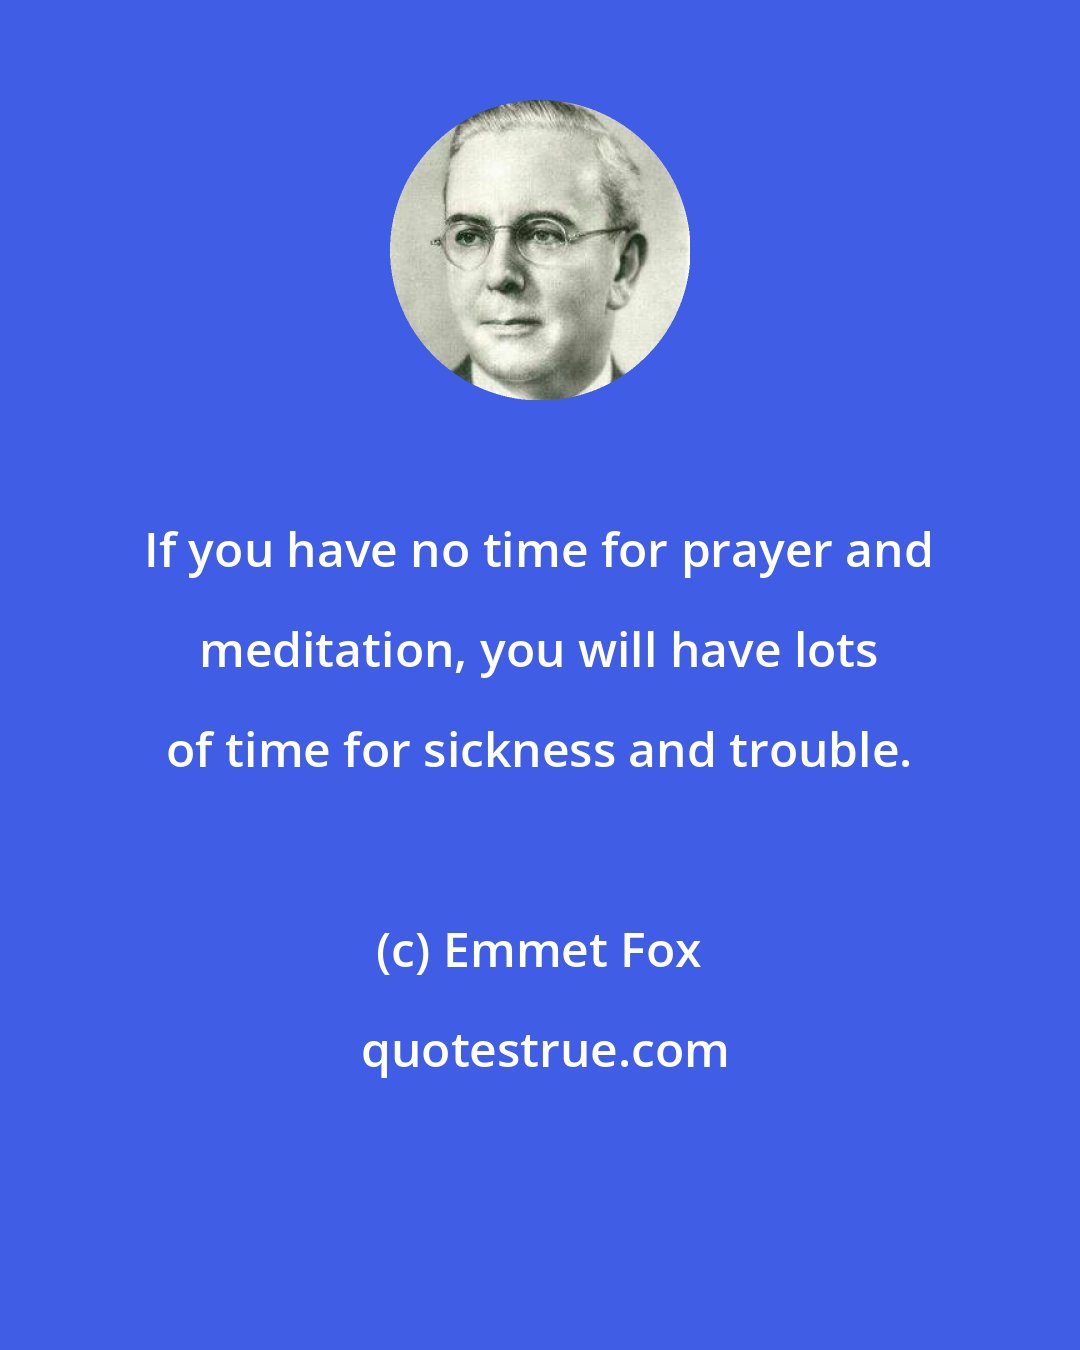 Emmet Fox: If you have no time for prayer and meditation, you will have lots of time for sickness and trouble.